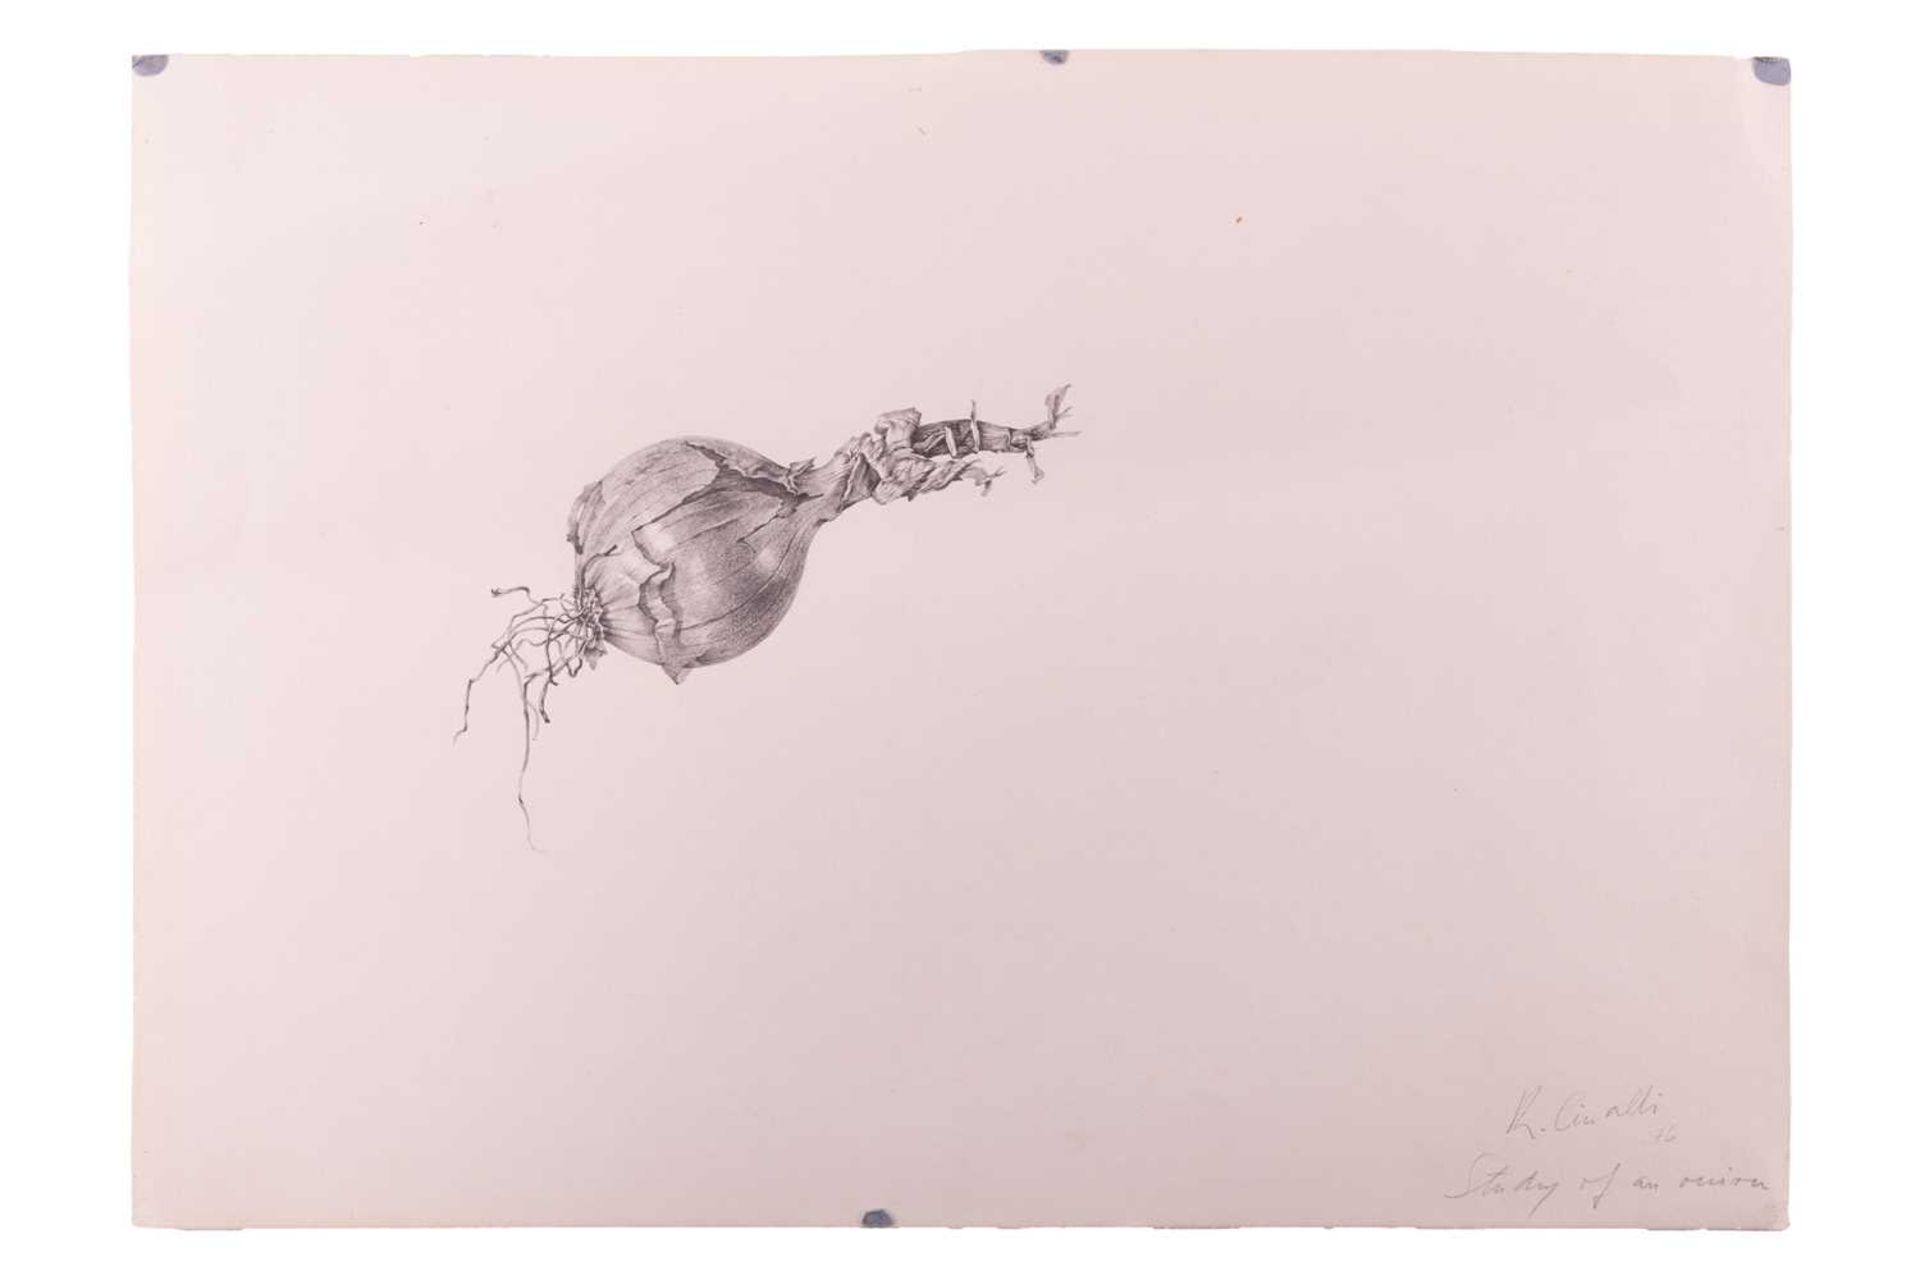 Ricardo Cinalli (Argentine b.1948), 'Study of an onion', signed 'R. Cinalli' and dated '76 in pencil